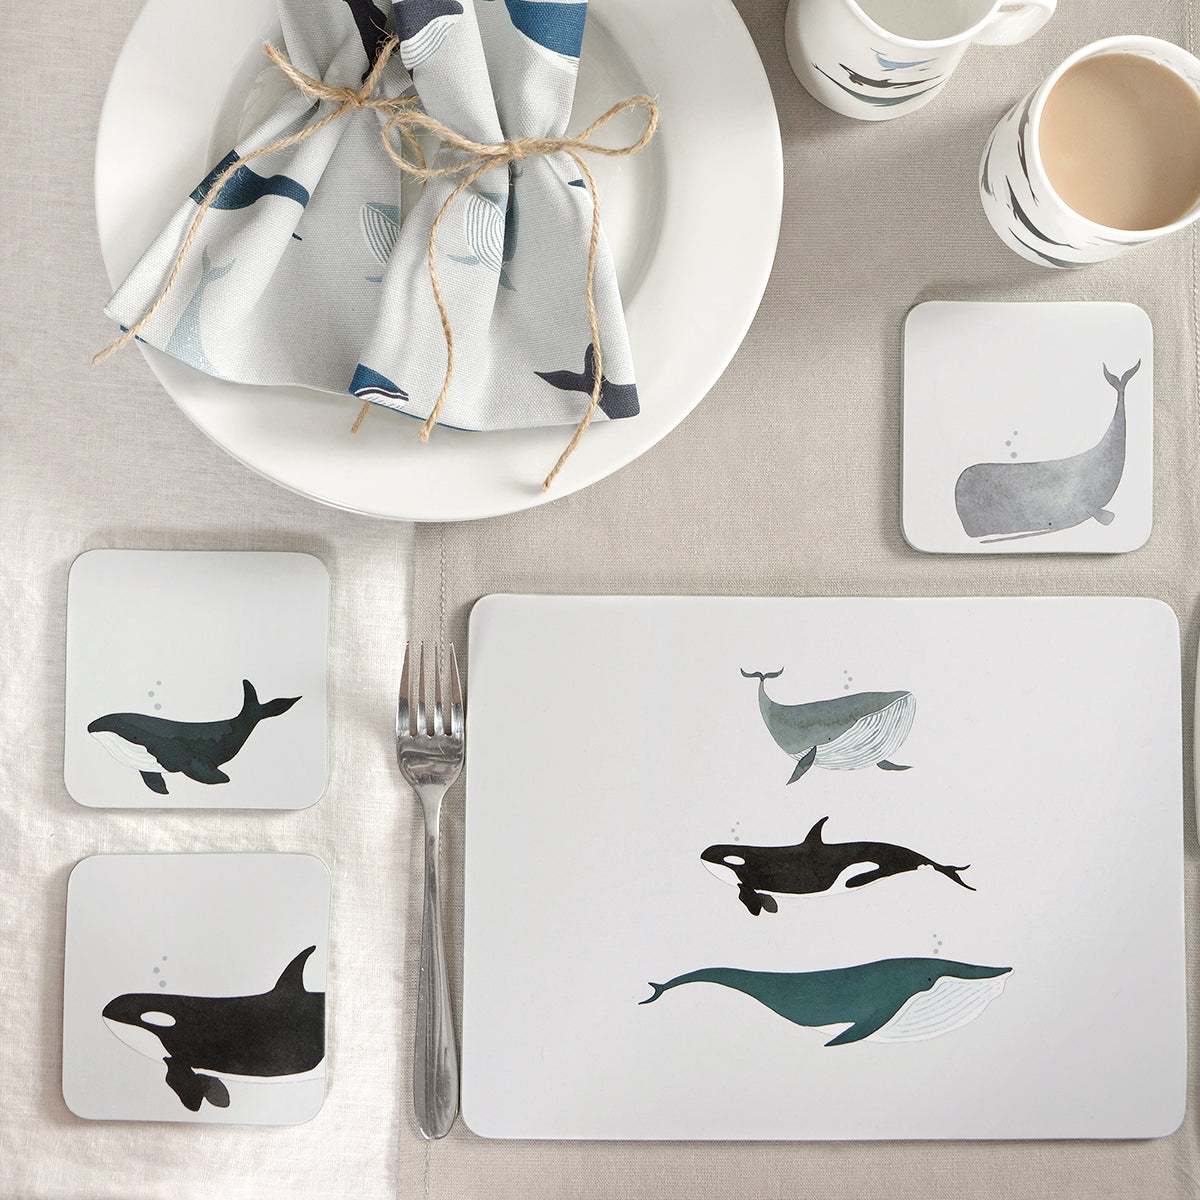 Whales Cork Coasters (Set of 4) by Sophie Allport